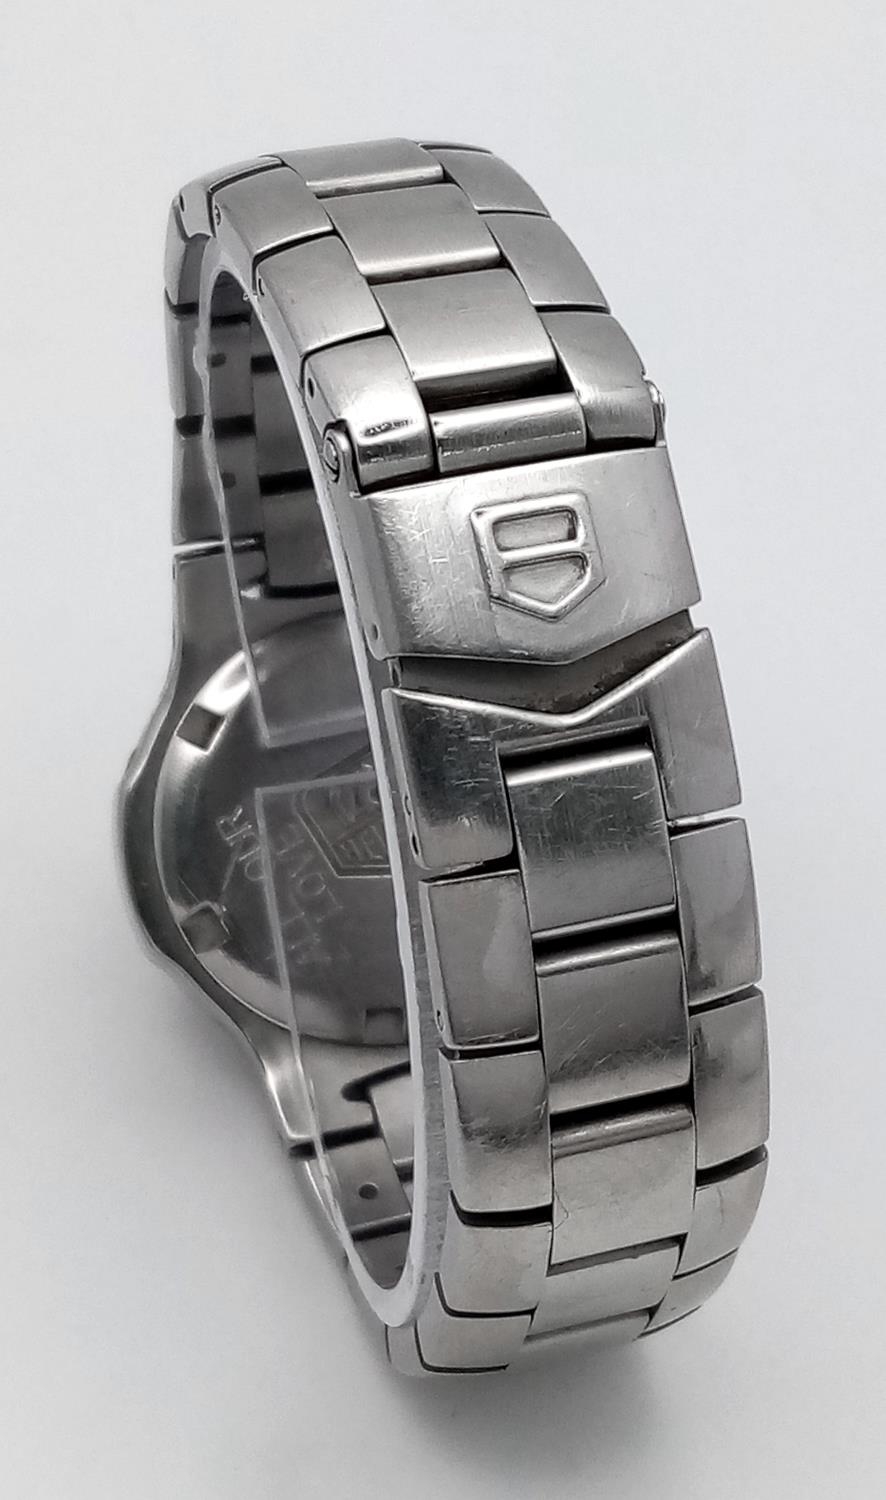 A Tag Heuer Professional Ladies Quartz Watch. Stainless steel bracelet and case - 28mm. Grey dial - Image 6 of 8